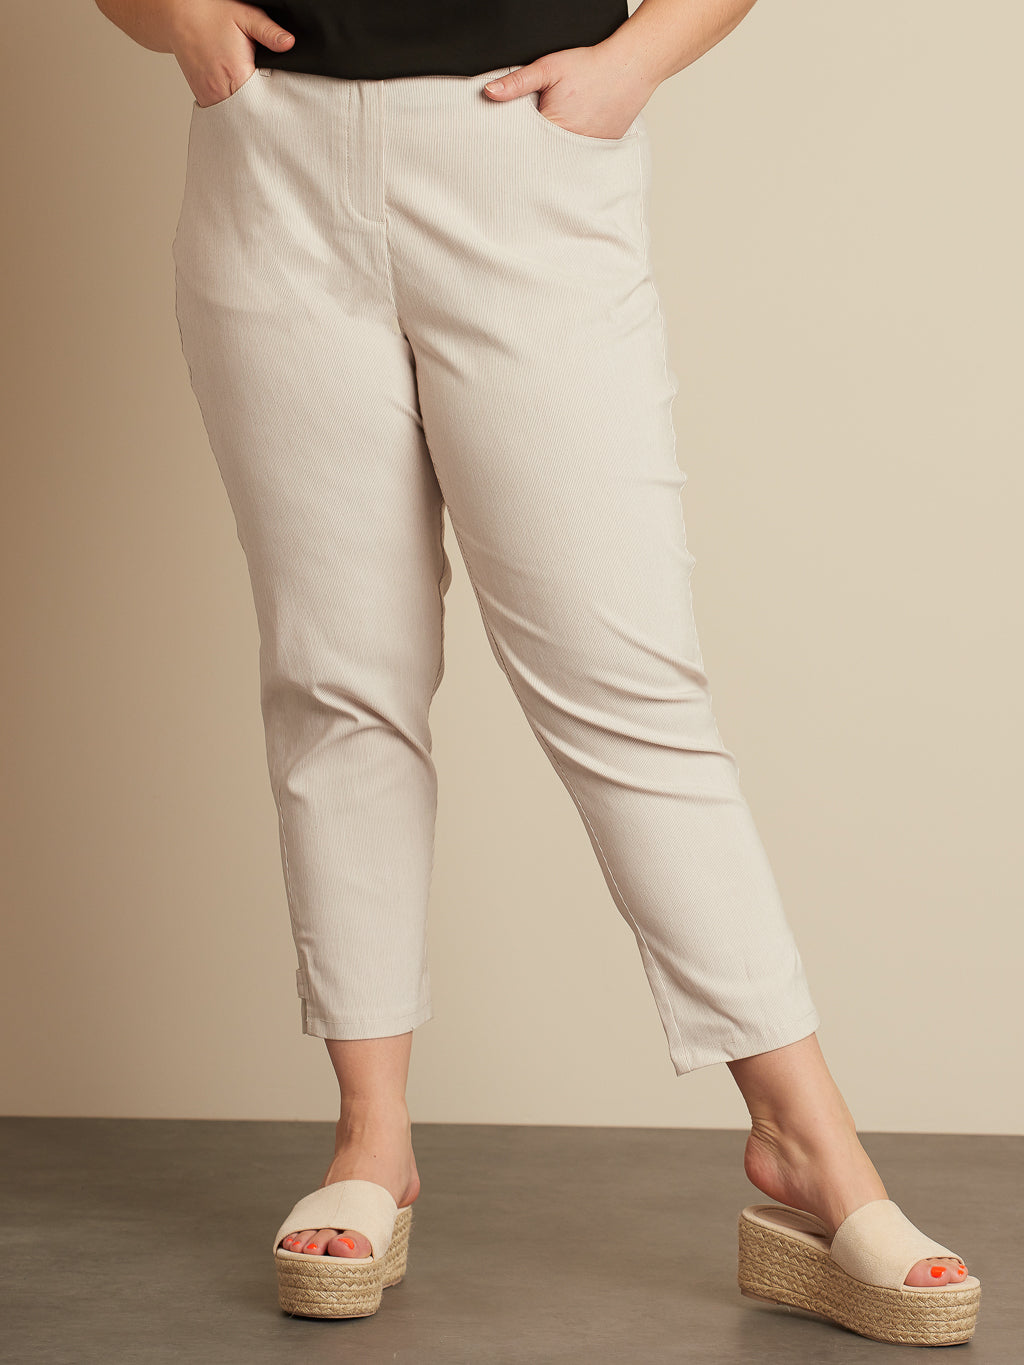 Semi-fitted 7/8 pant